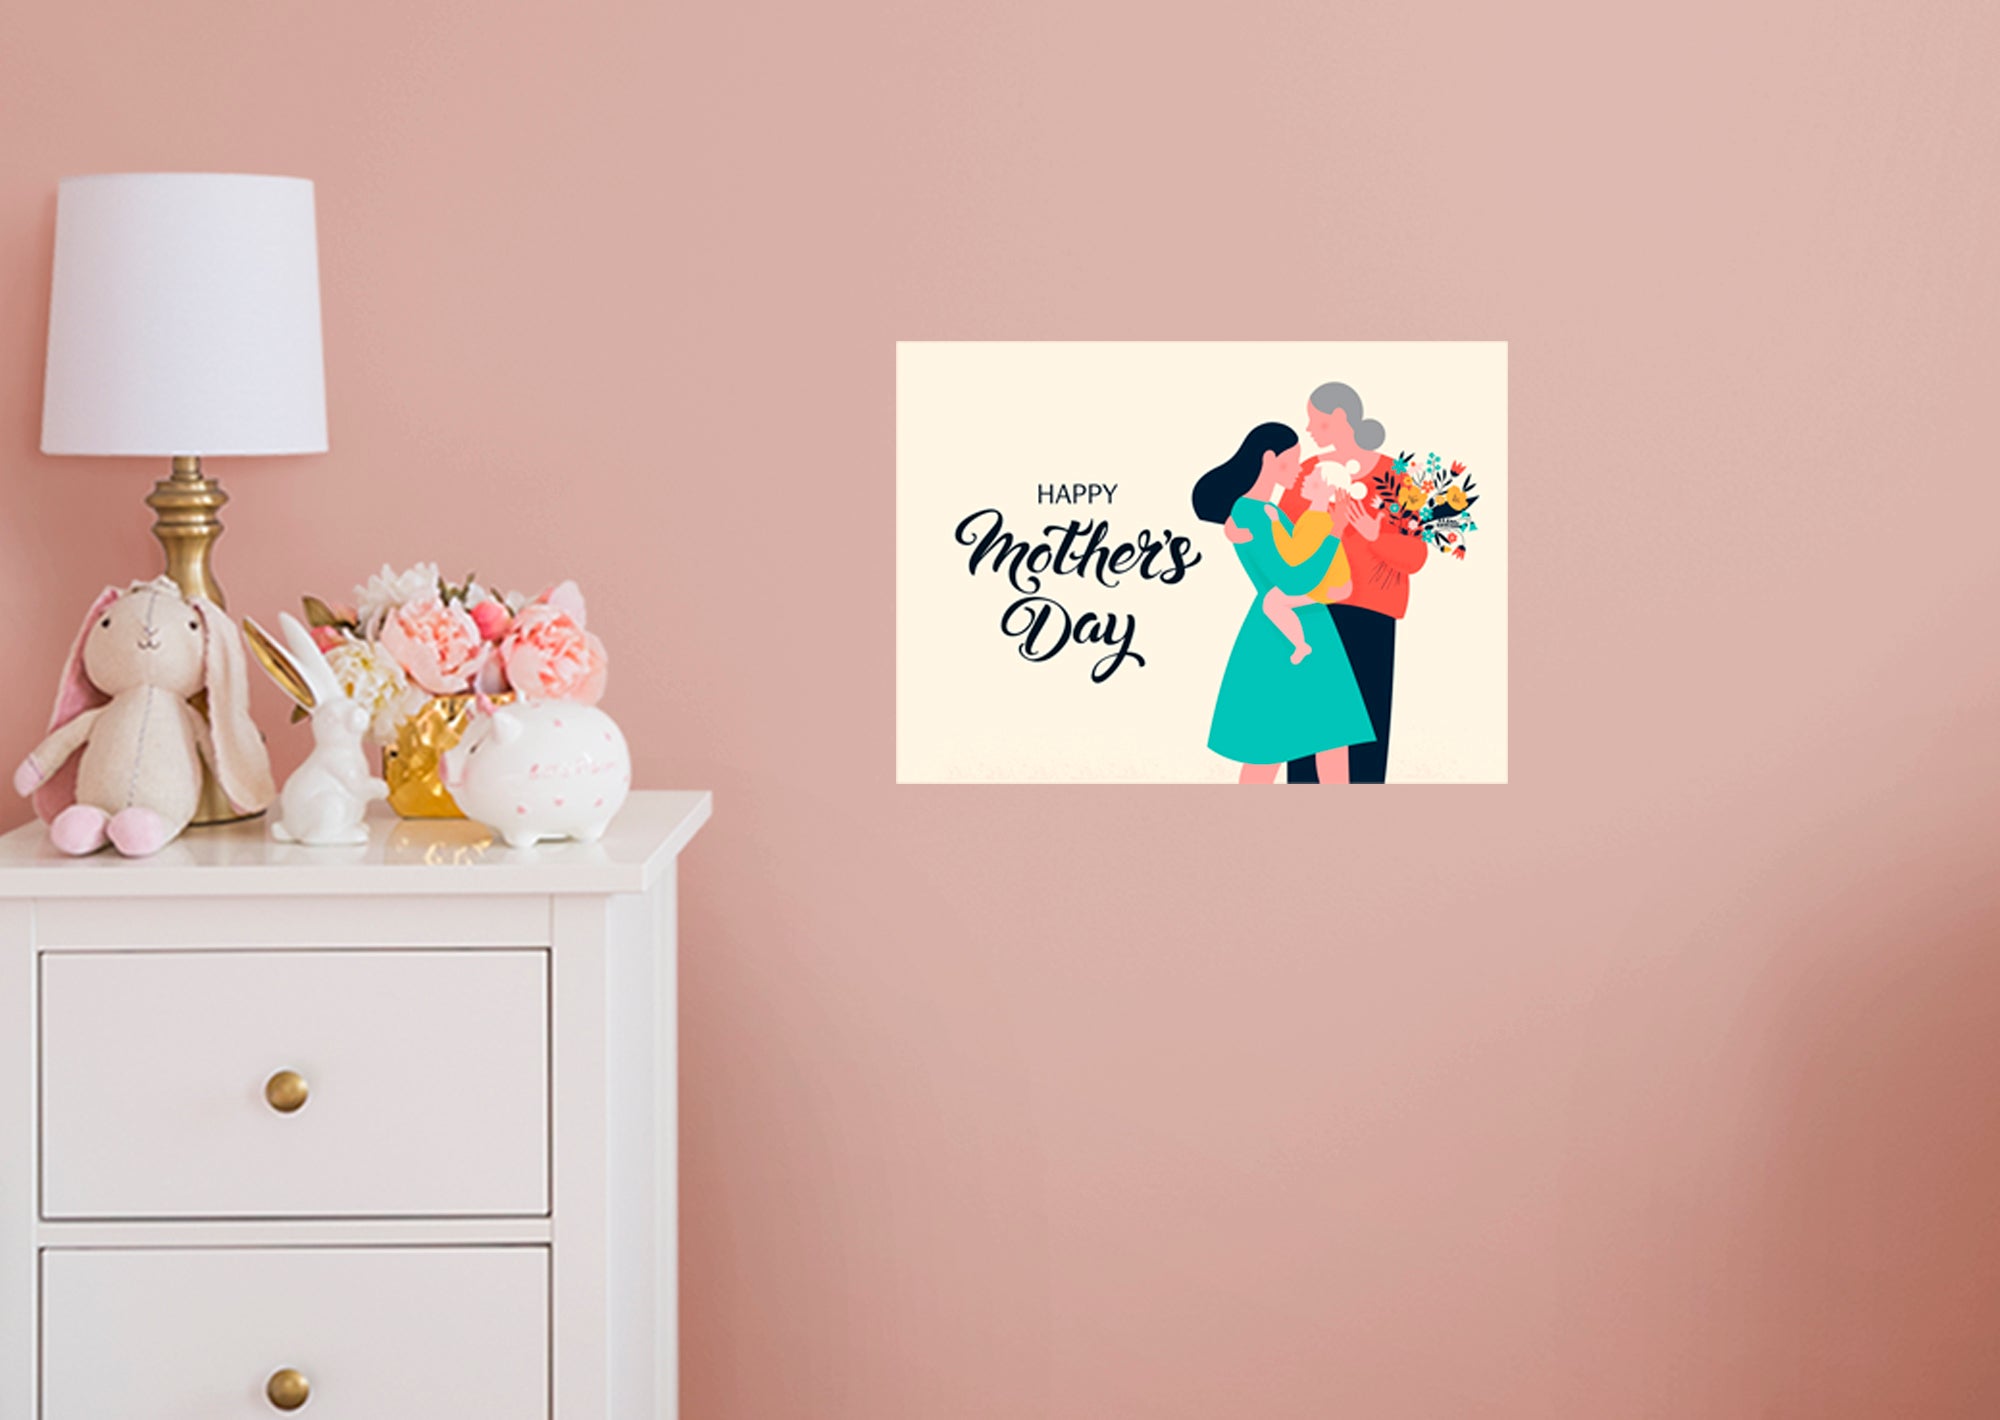 Mothers Day Three Generations Mural - Removable Wall Decal Large by Fathead | Vinyl